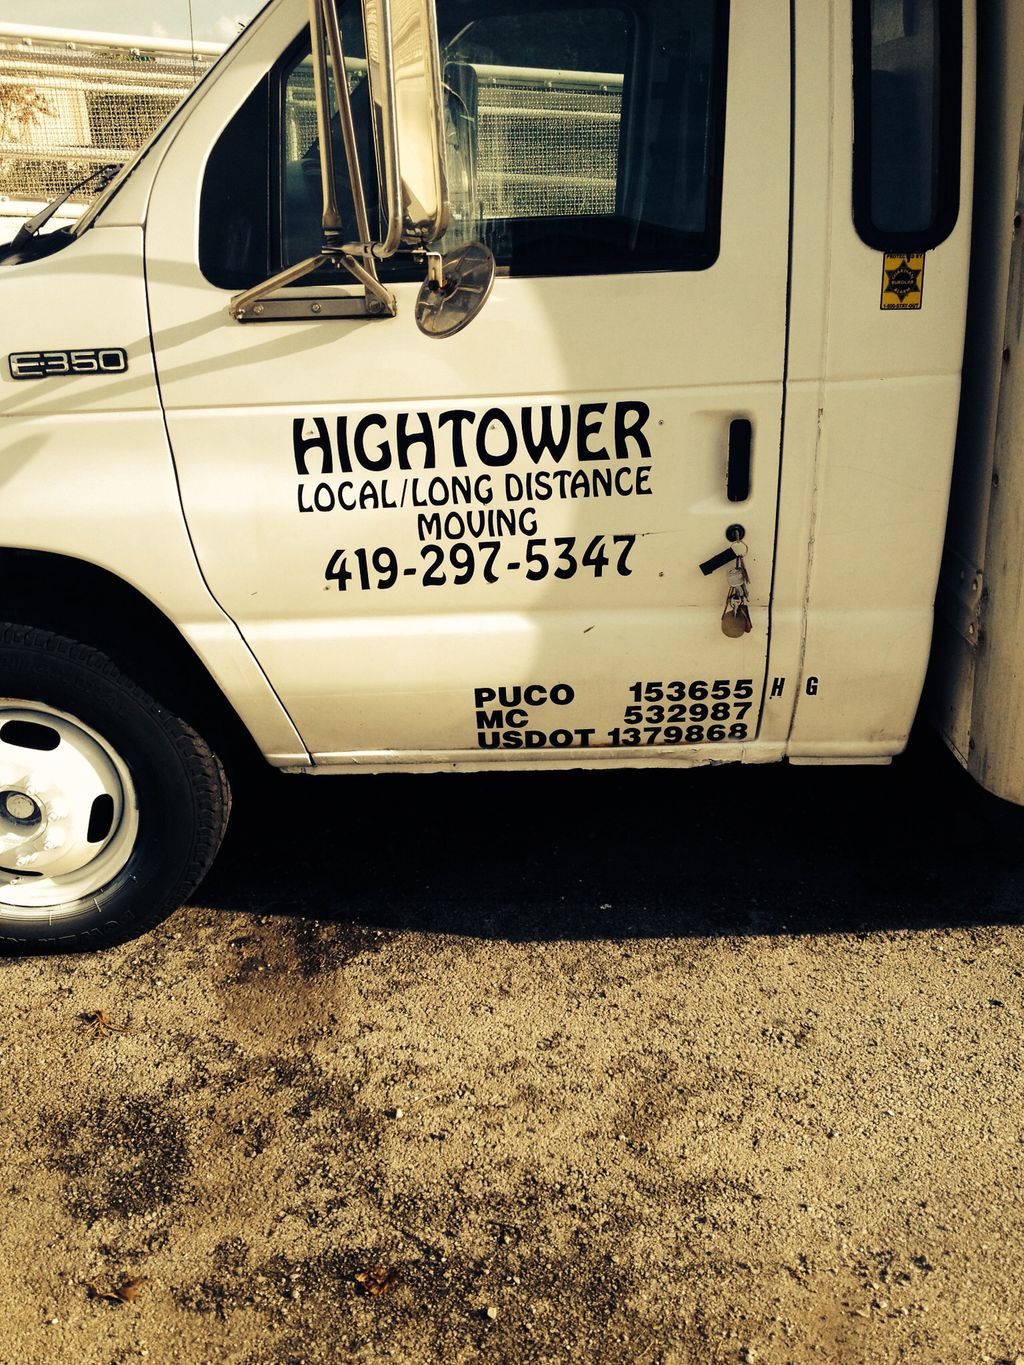 Hightower Local-Long Distance Moving